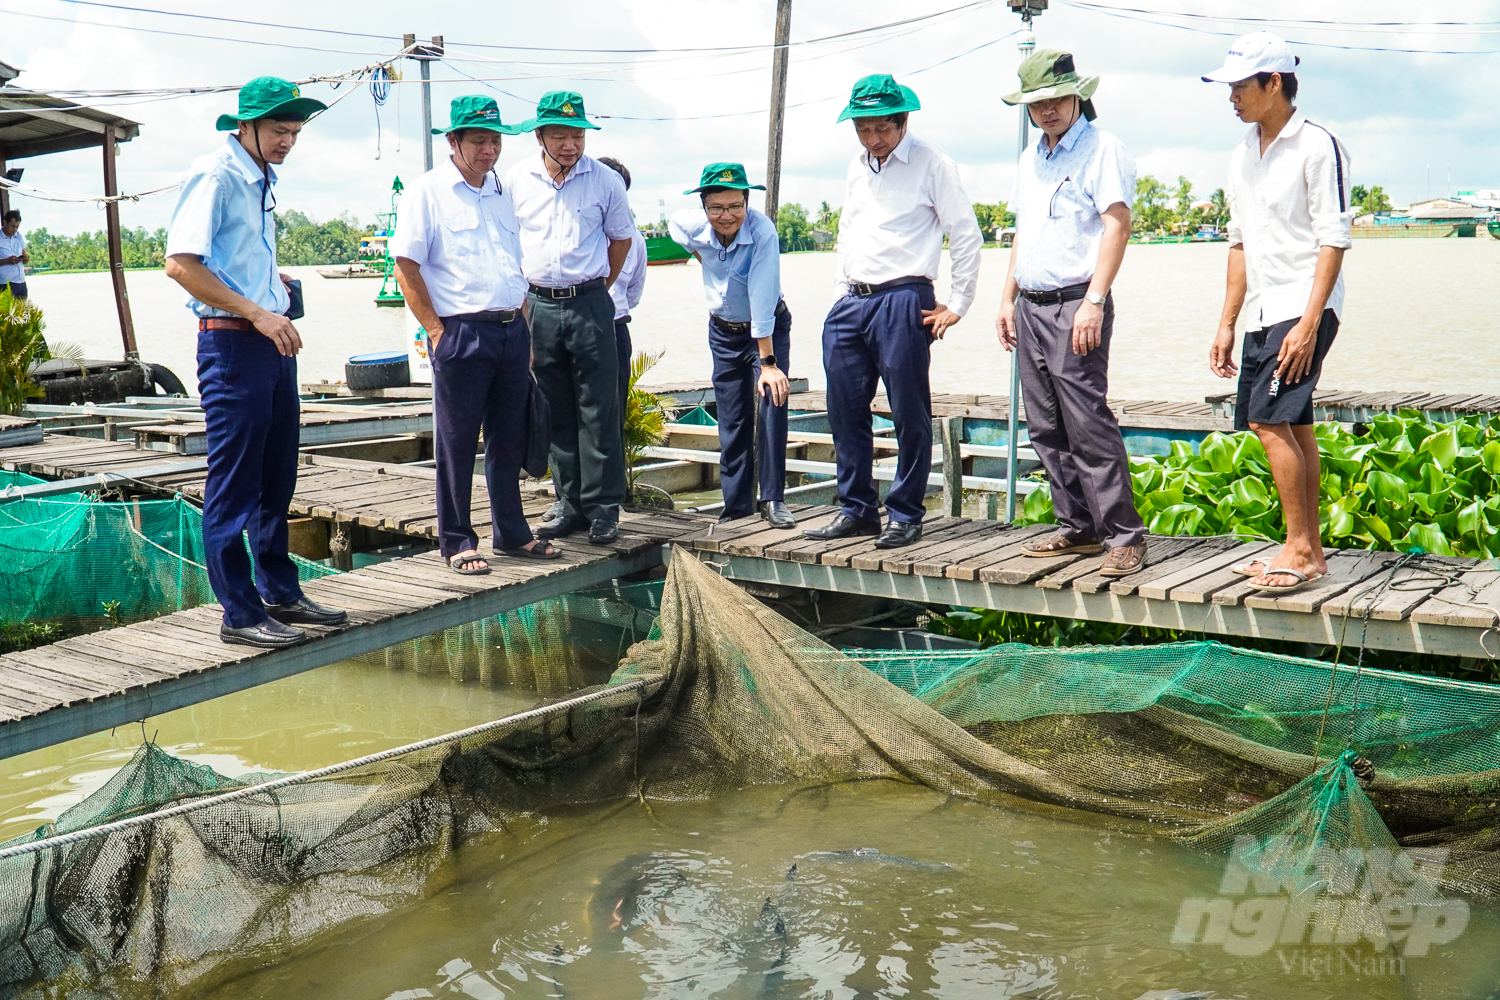 Mr. Phan Quang Minh, Deputy Director of the Department of Animal Health, and units under the Can Tho City Department of MARD inspecting the prevention of aquatic diseases at Bay Bon fish raft, Con Son, Binh Thuy district. Photo: Kim Anh.